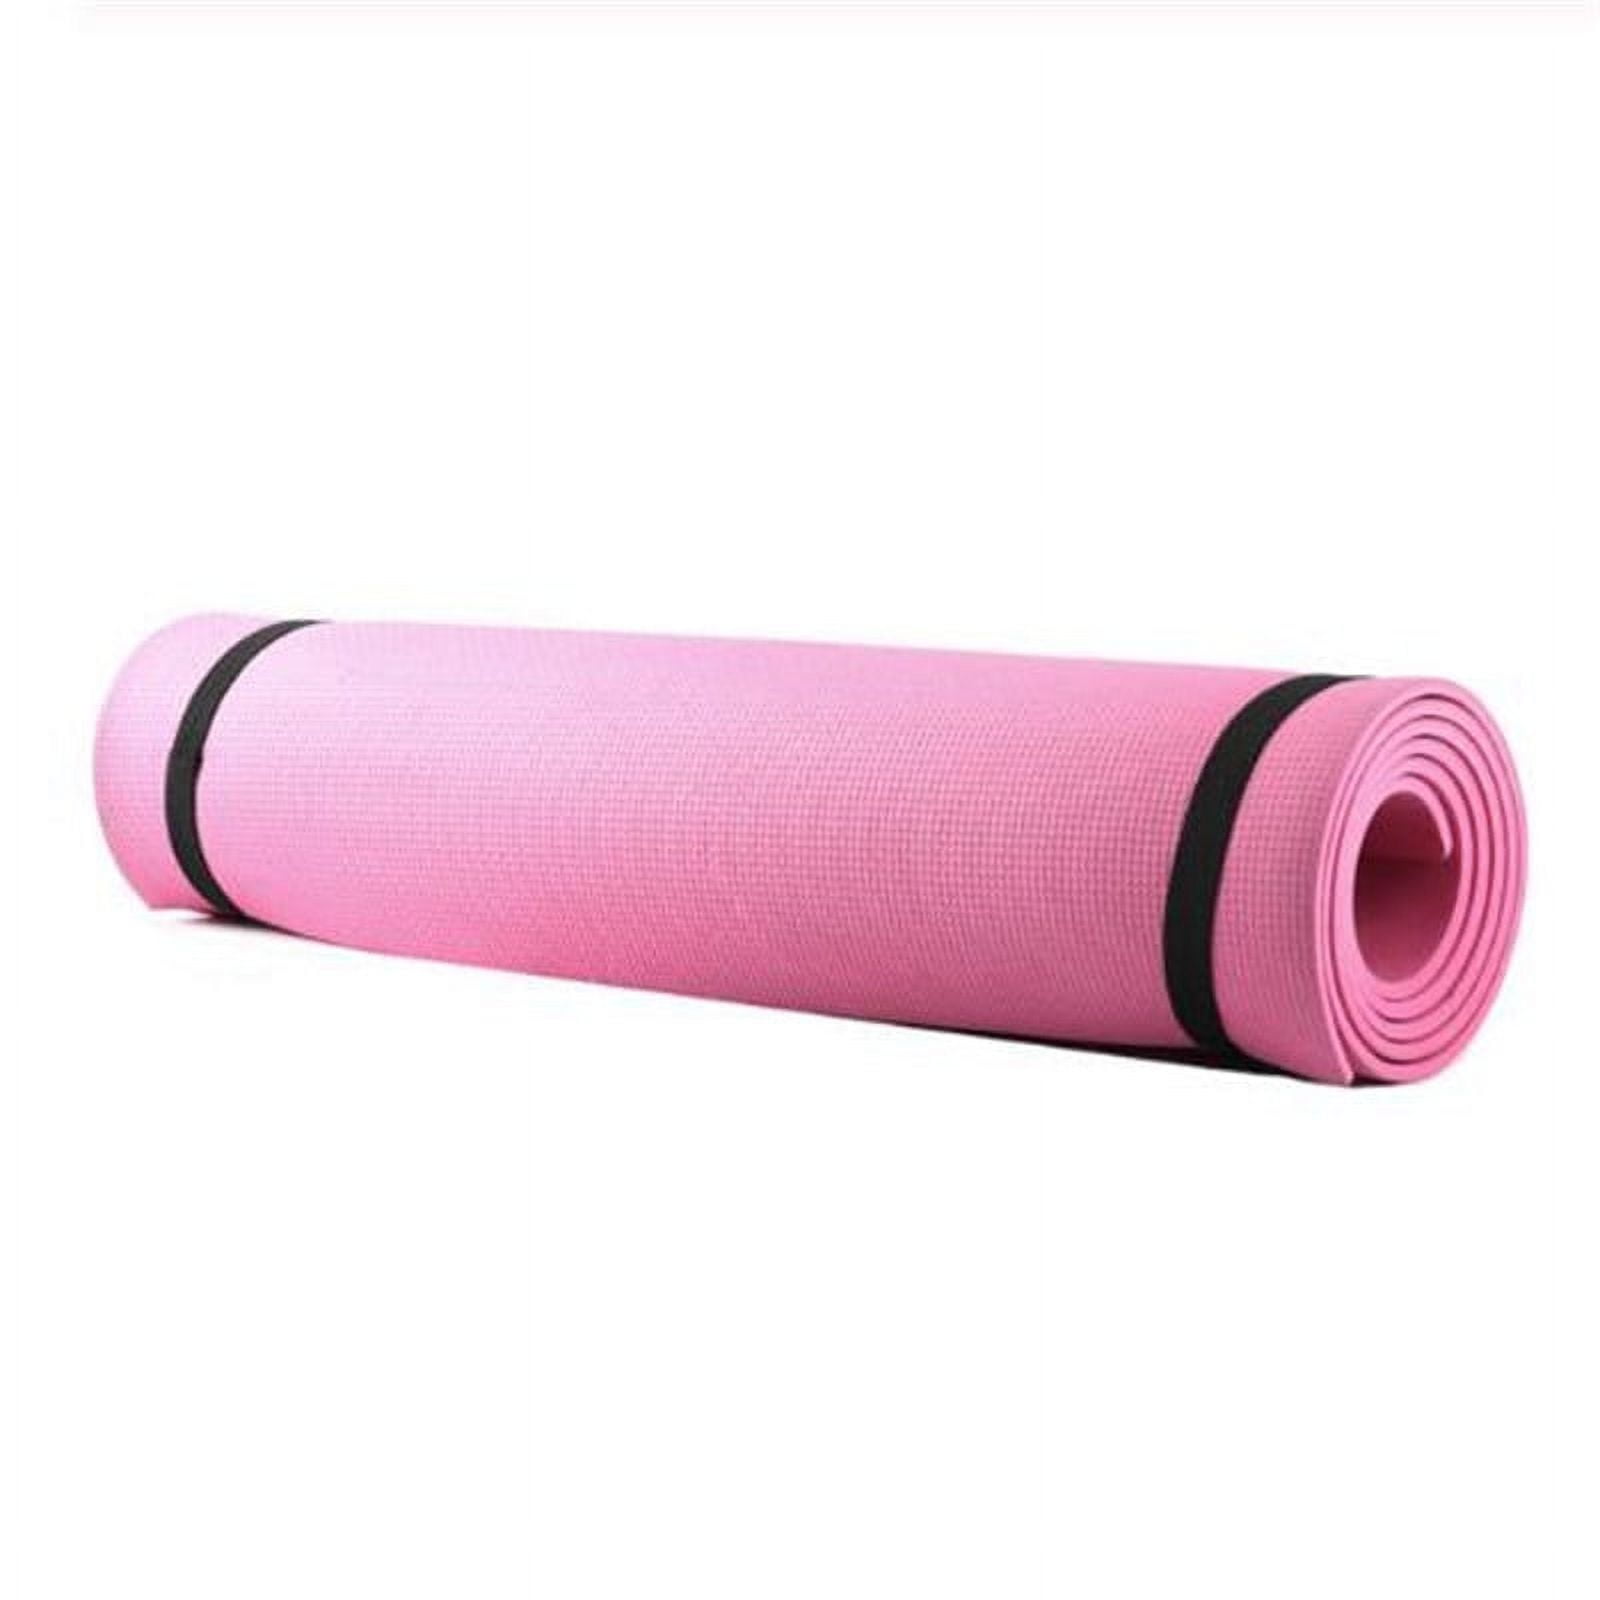 6mm Non-slip Yoga Mat Health Lose Weight Fitness Durable Thick Exercise ...